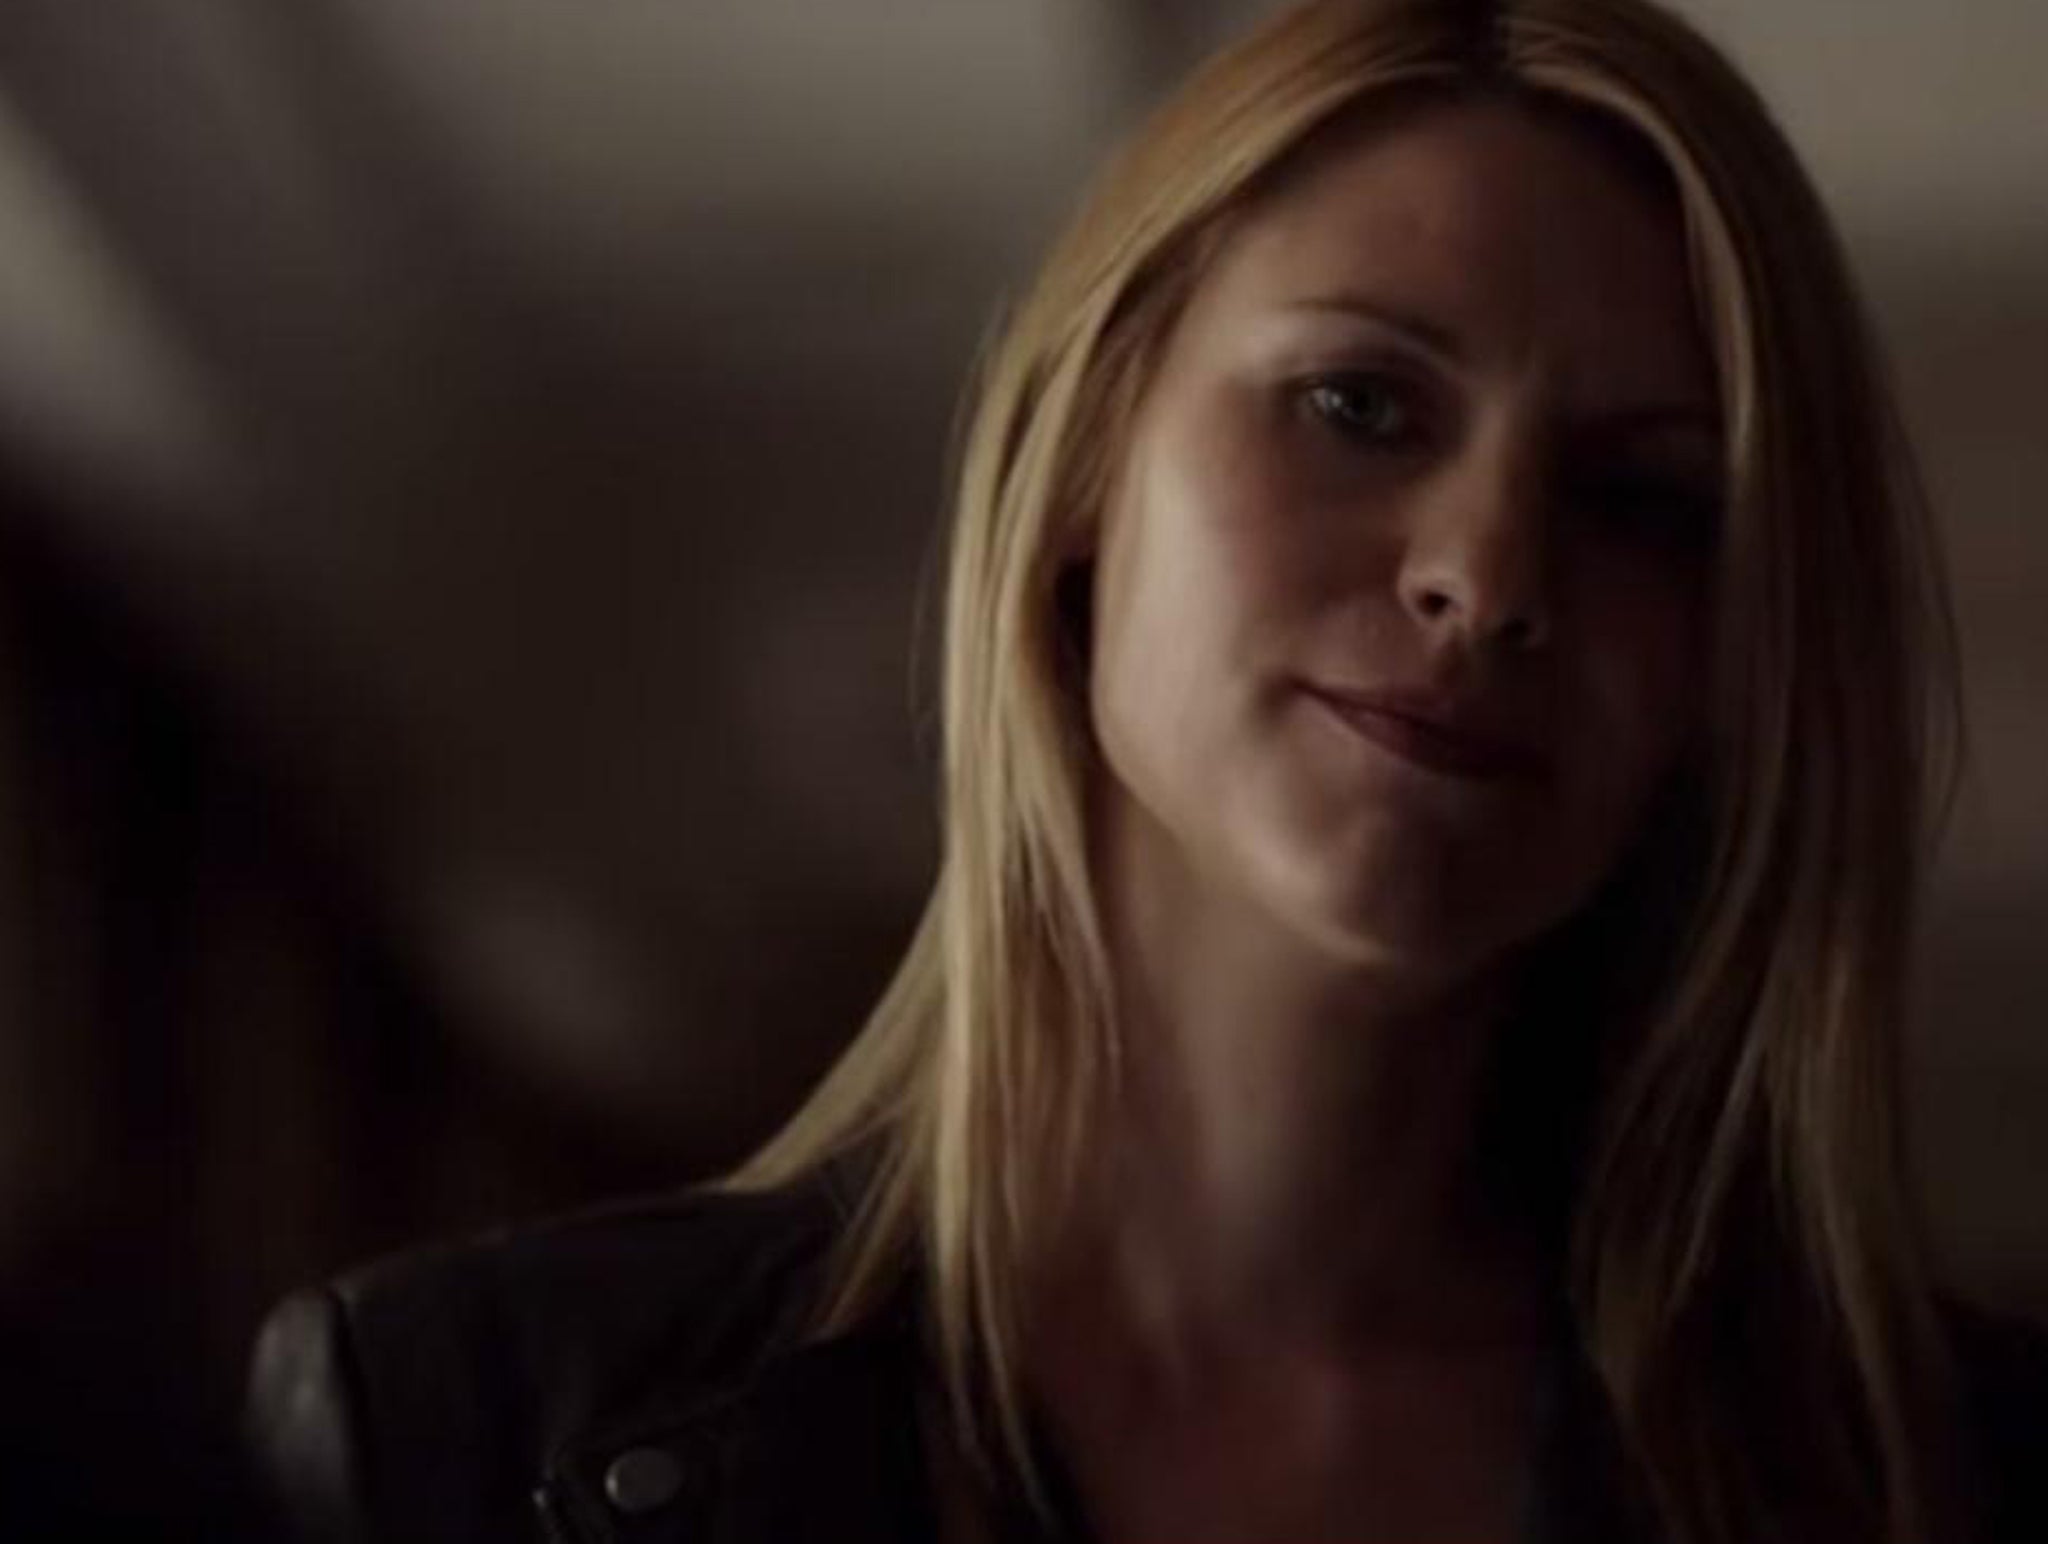 Carrie Mathison returns to the field in the fourth season of Showtime's Homeland